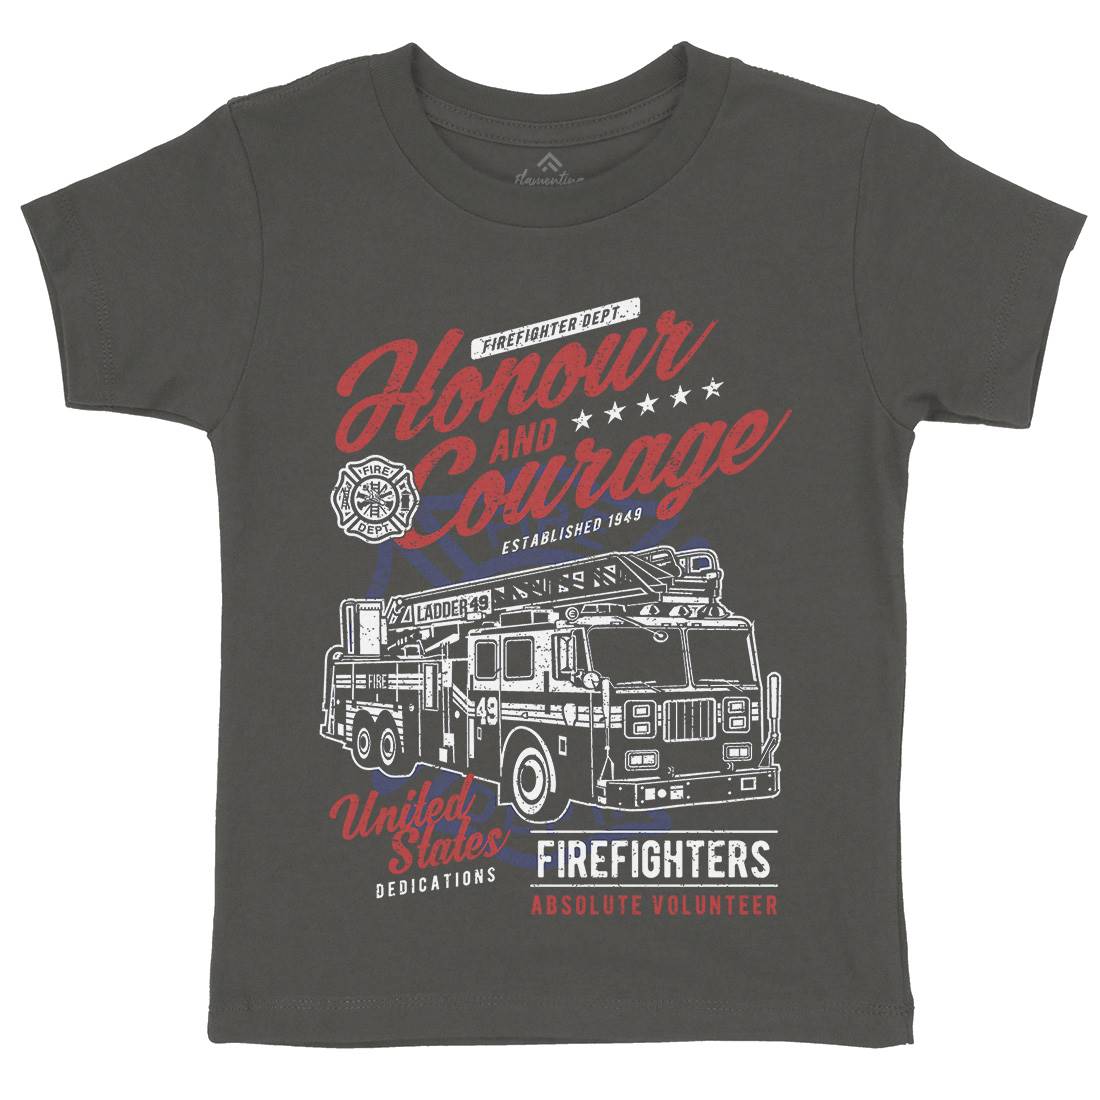 Honour And Courage Kids Crew Neck T-Shirt Firefighters A684